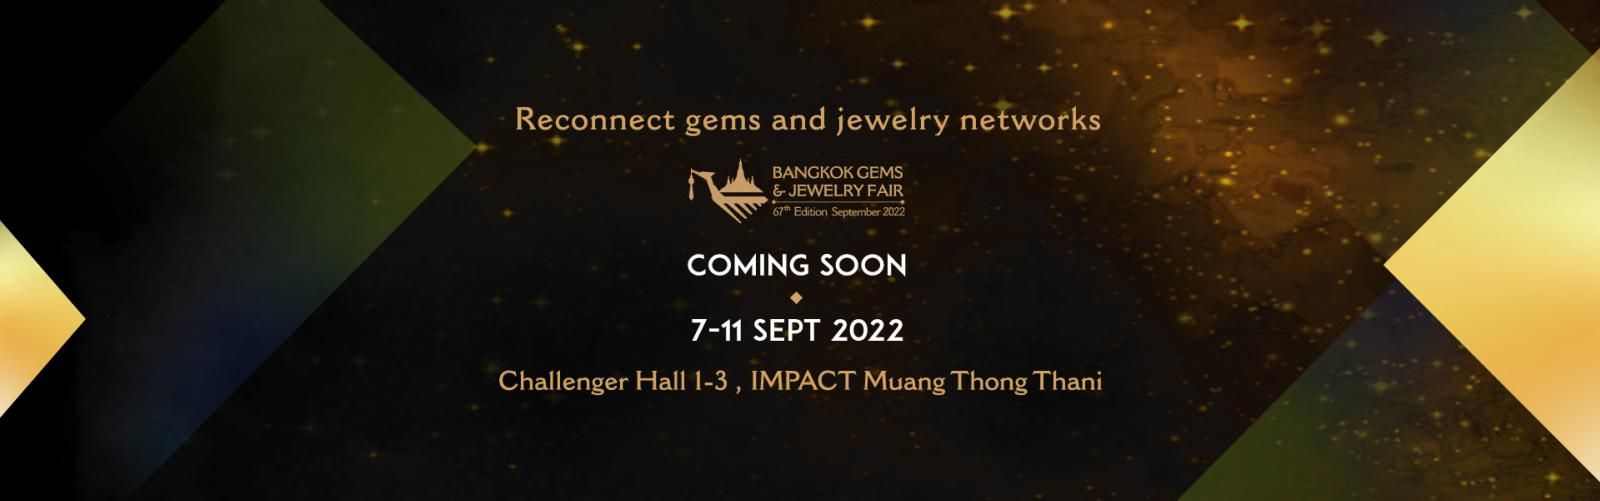  The coming back of the ‘67th Bangkok Gems and Jewelry Fair’ after the Covid-19 outbreak